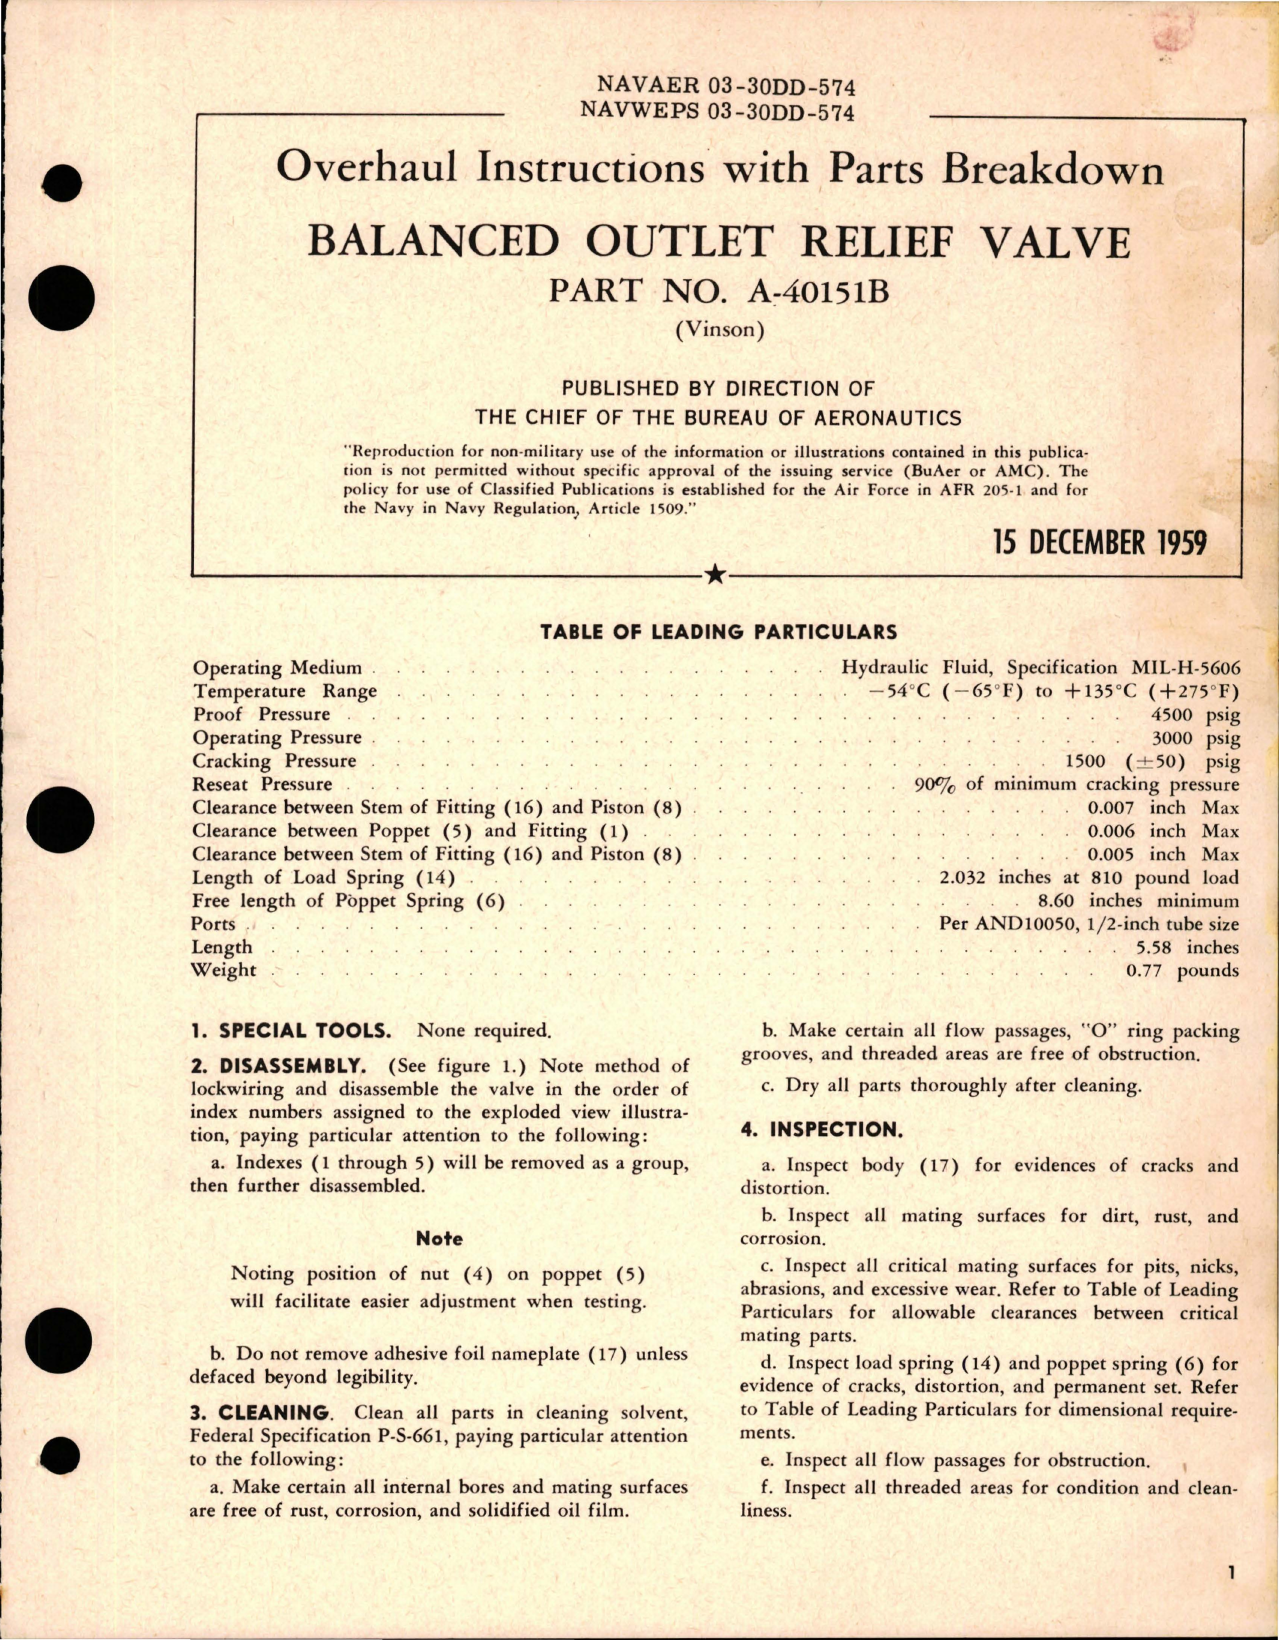 Sample page 1 from AirCorps Library document: Overhaul Instructions with Parts for Balanced Outlet Relief Valve - Part A-40151B